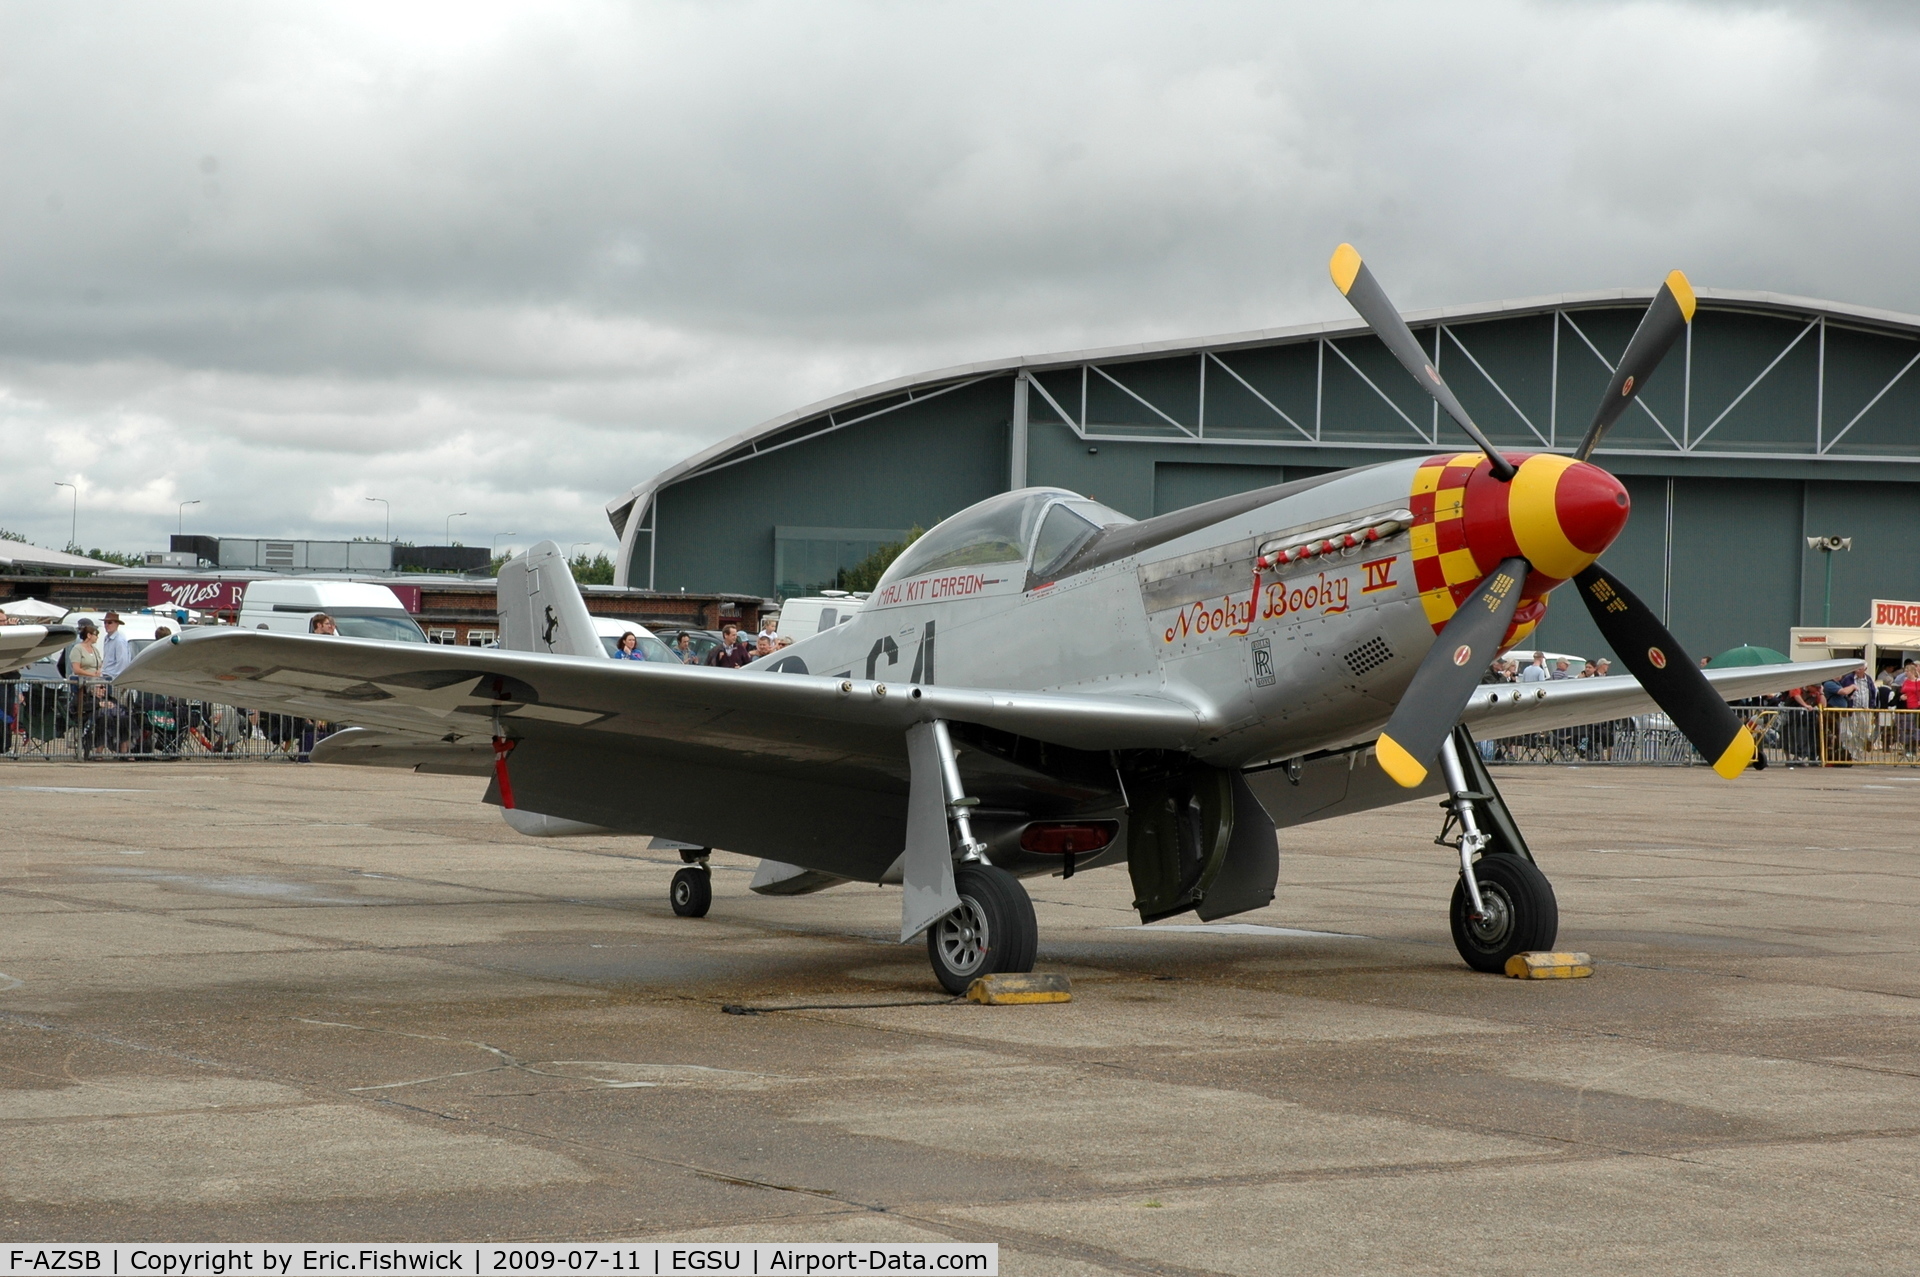 F-AZSB, 1944 North American P-51D Mustang C/N 122-40967, 5. 'Nooky Booky IV' at Duxford Flying Legends Air Show July 09